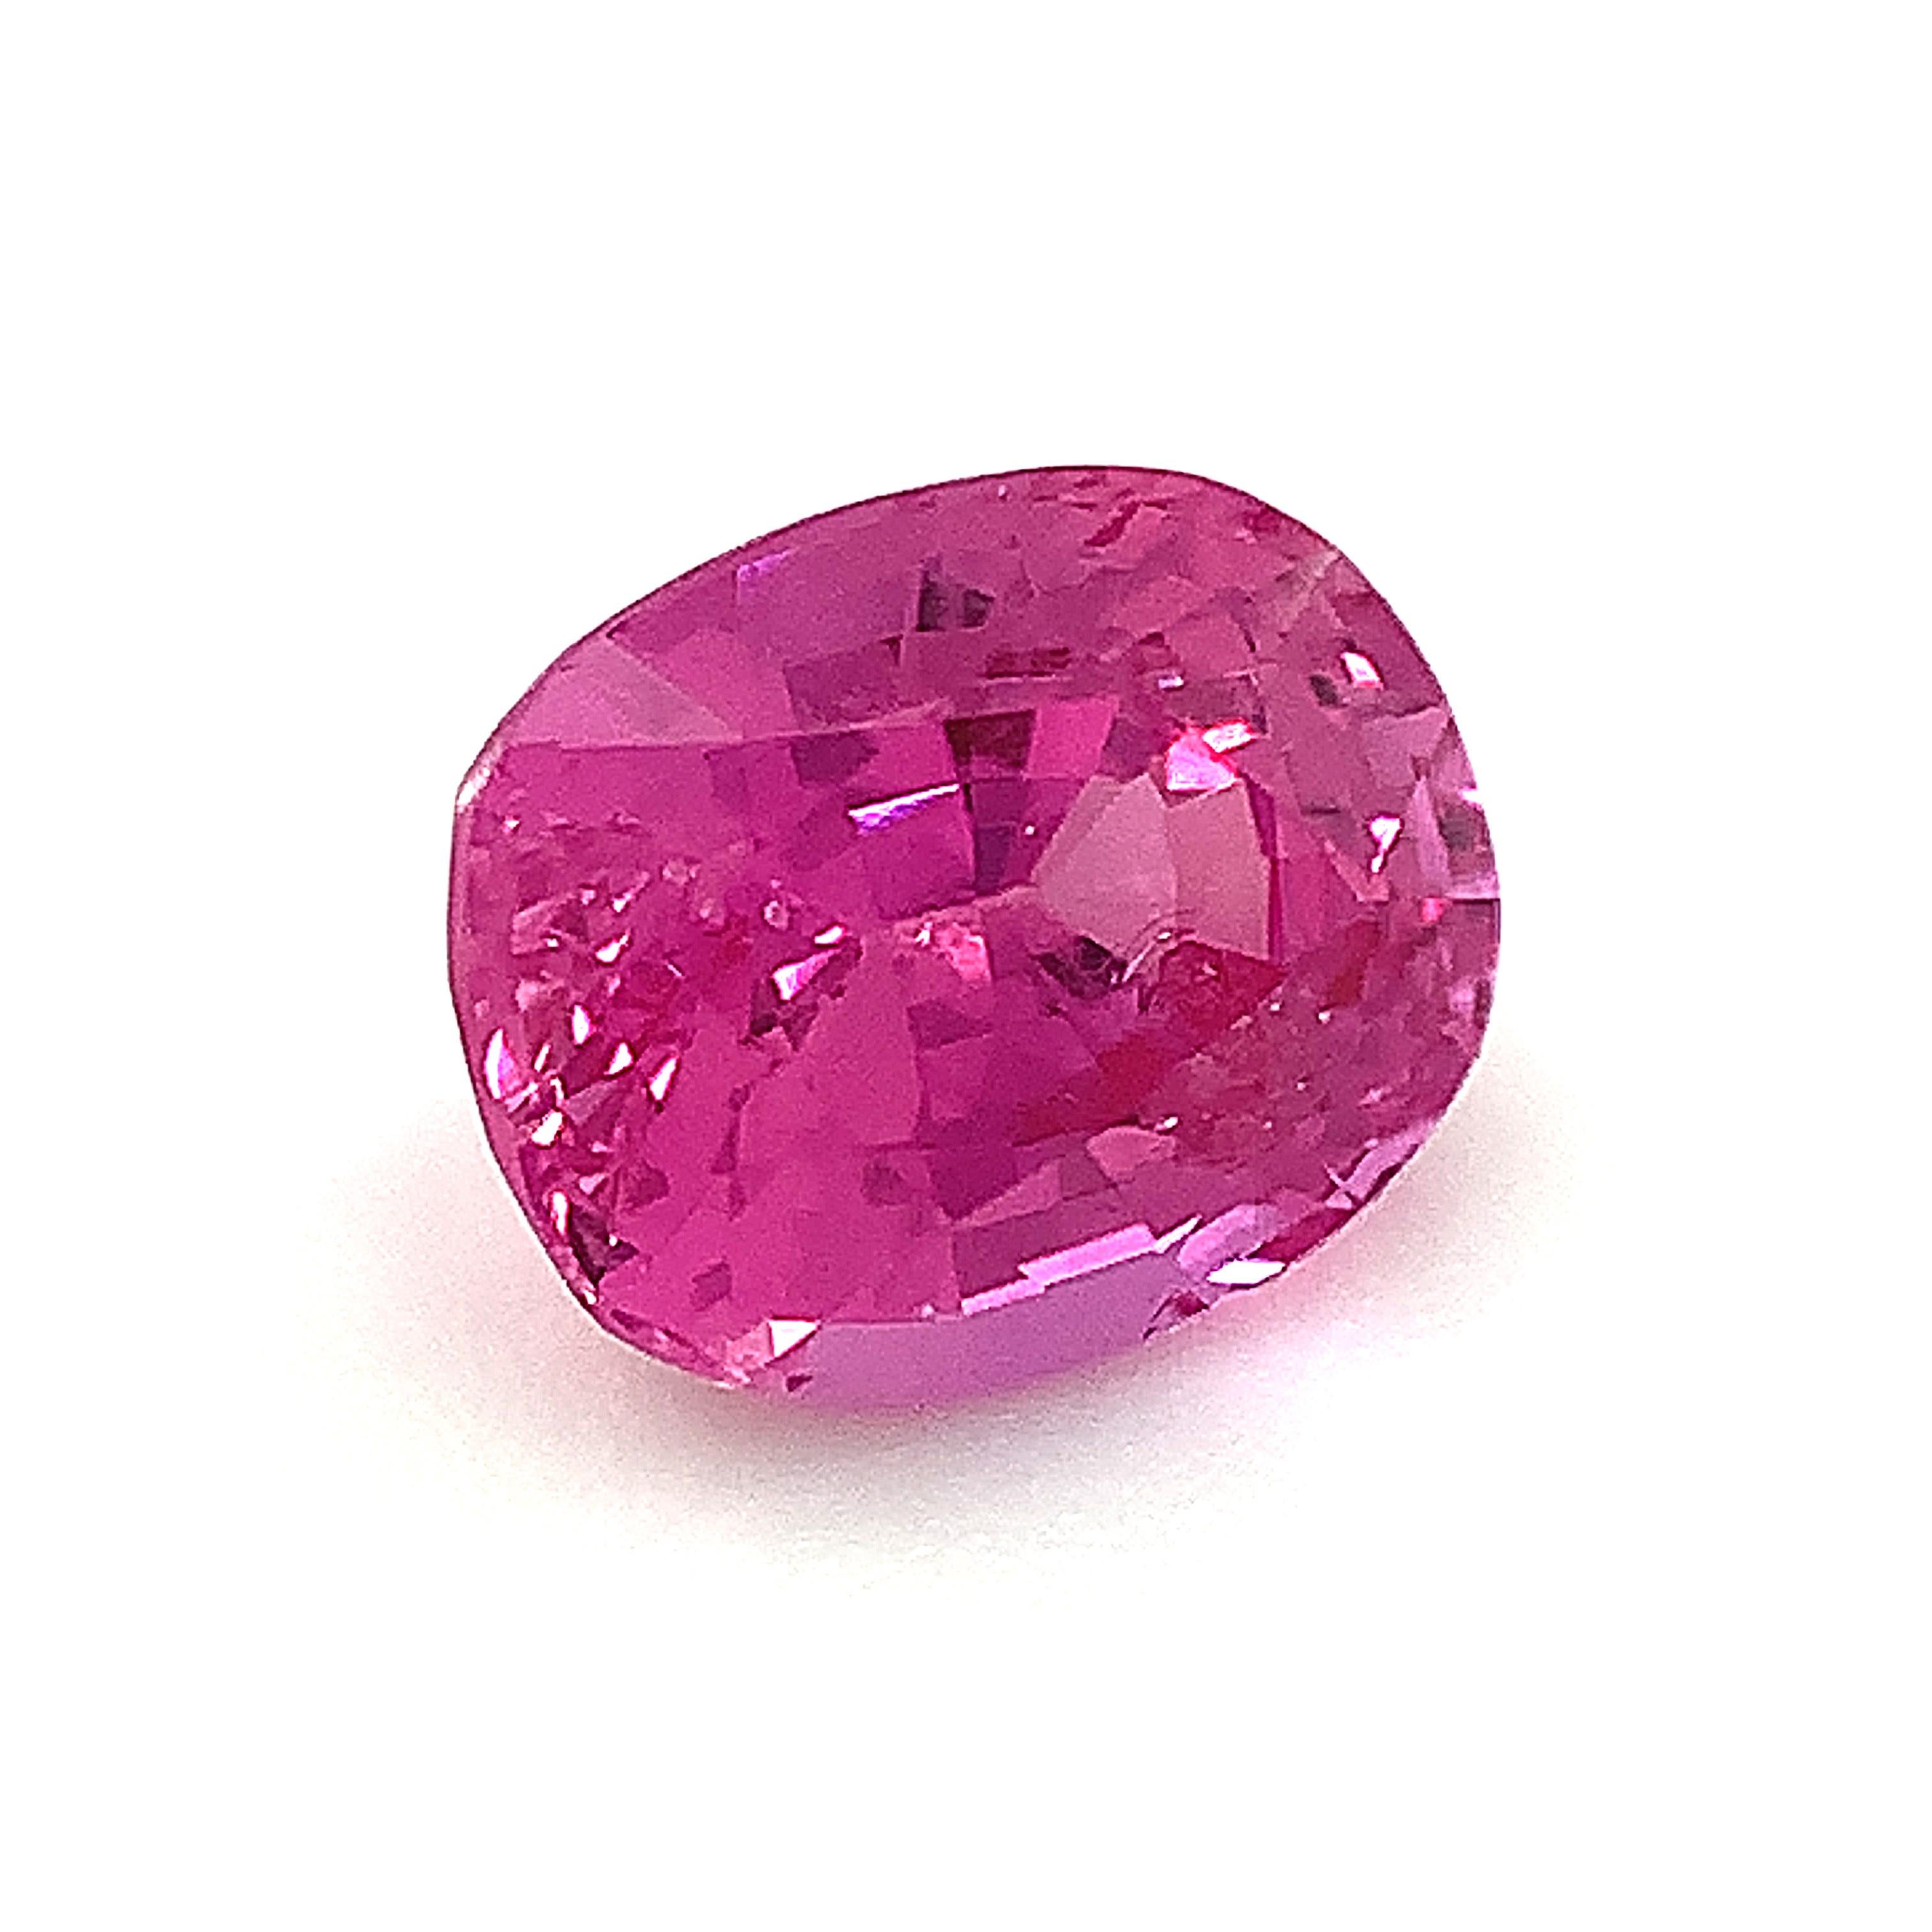 Cushion Cut Unheated 1.39 Carat Burmese Pink Sapphire, Unset Loose Gemstone, GIA Certified For Sale